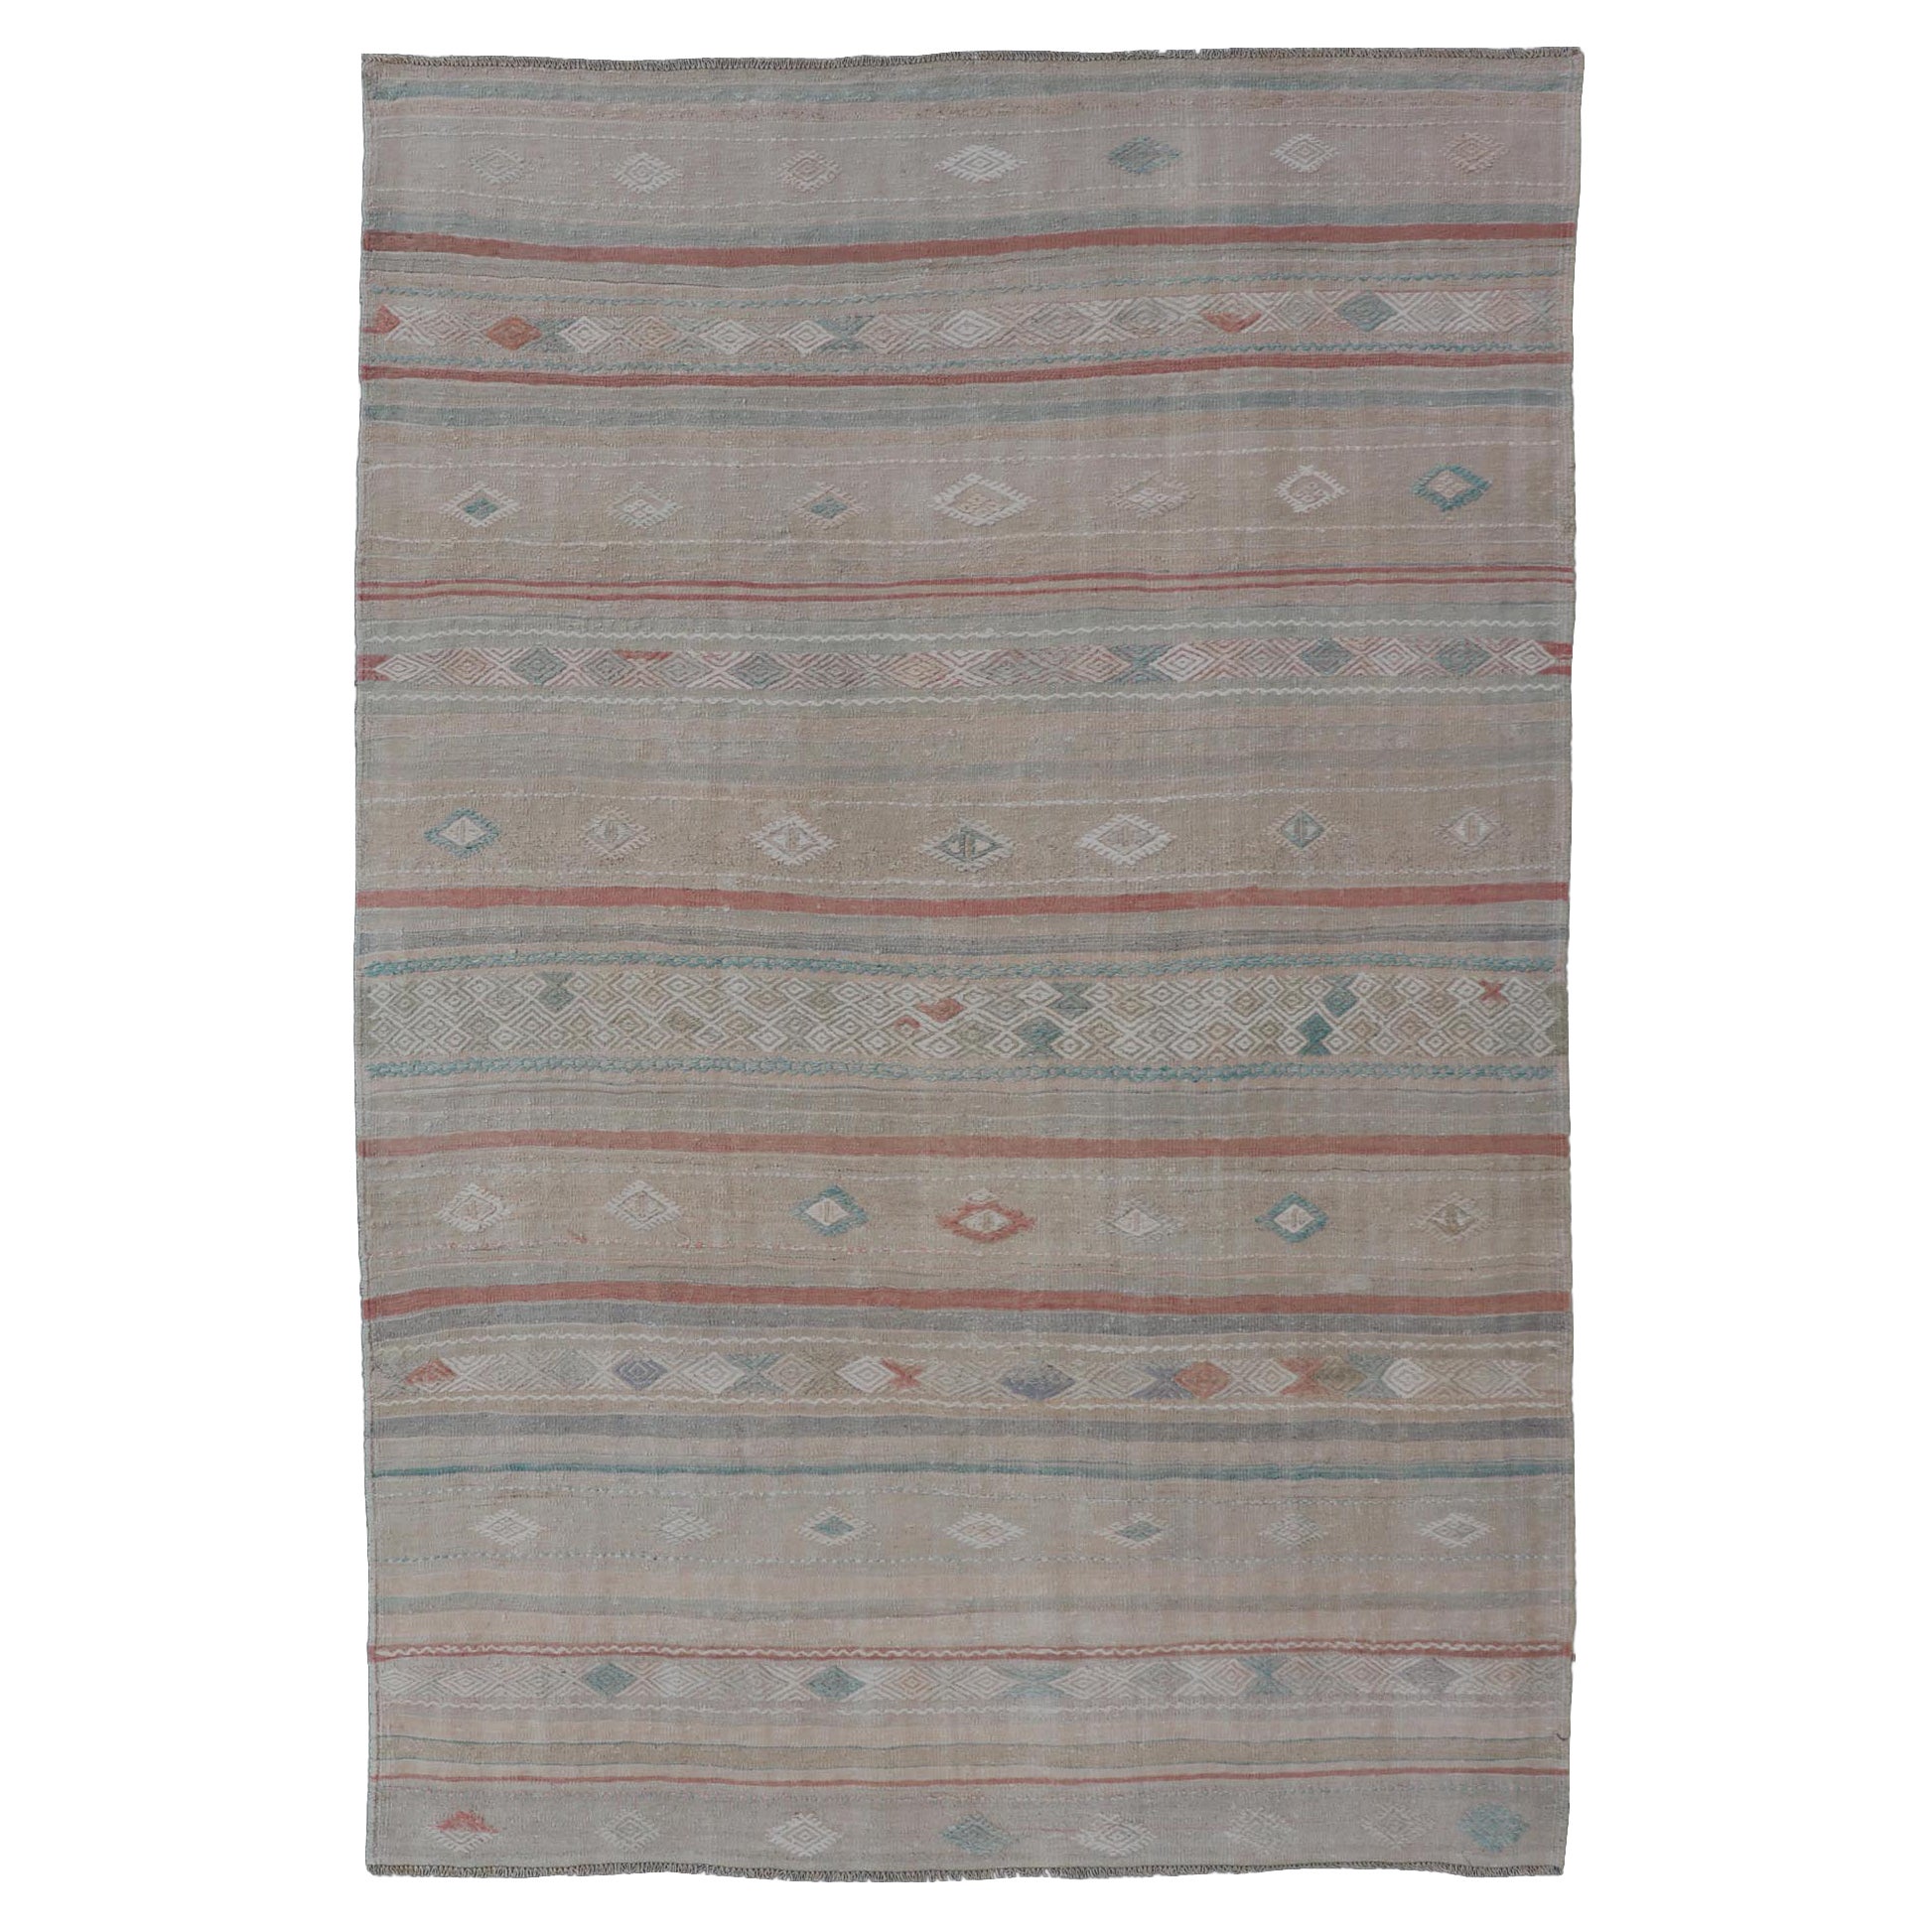 Turkish Flat-Weave Embroideries Kilim in Taupe, Green, Teal, Cream, and Brown